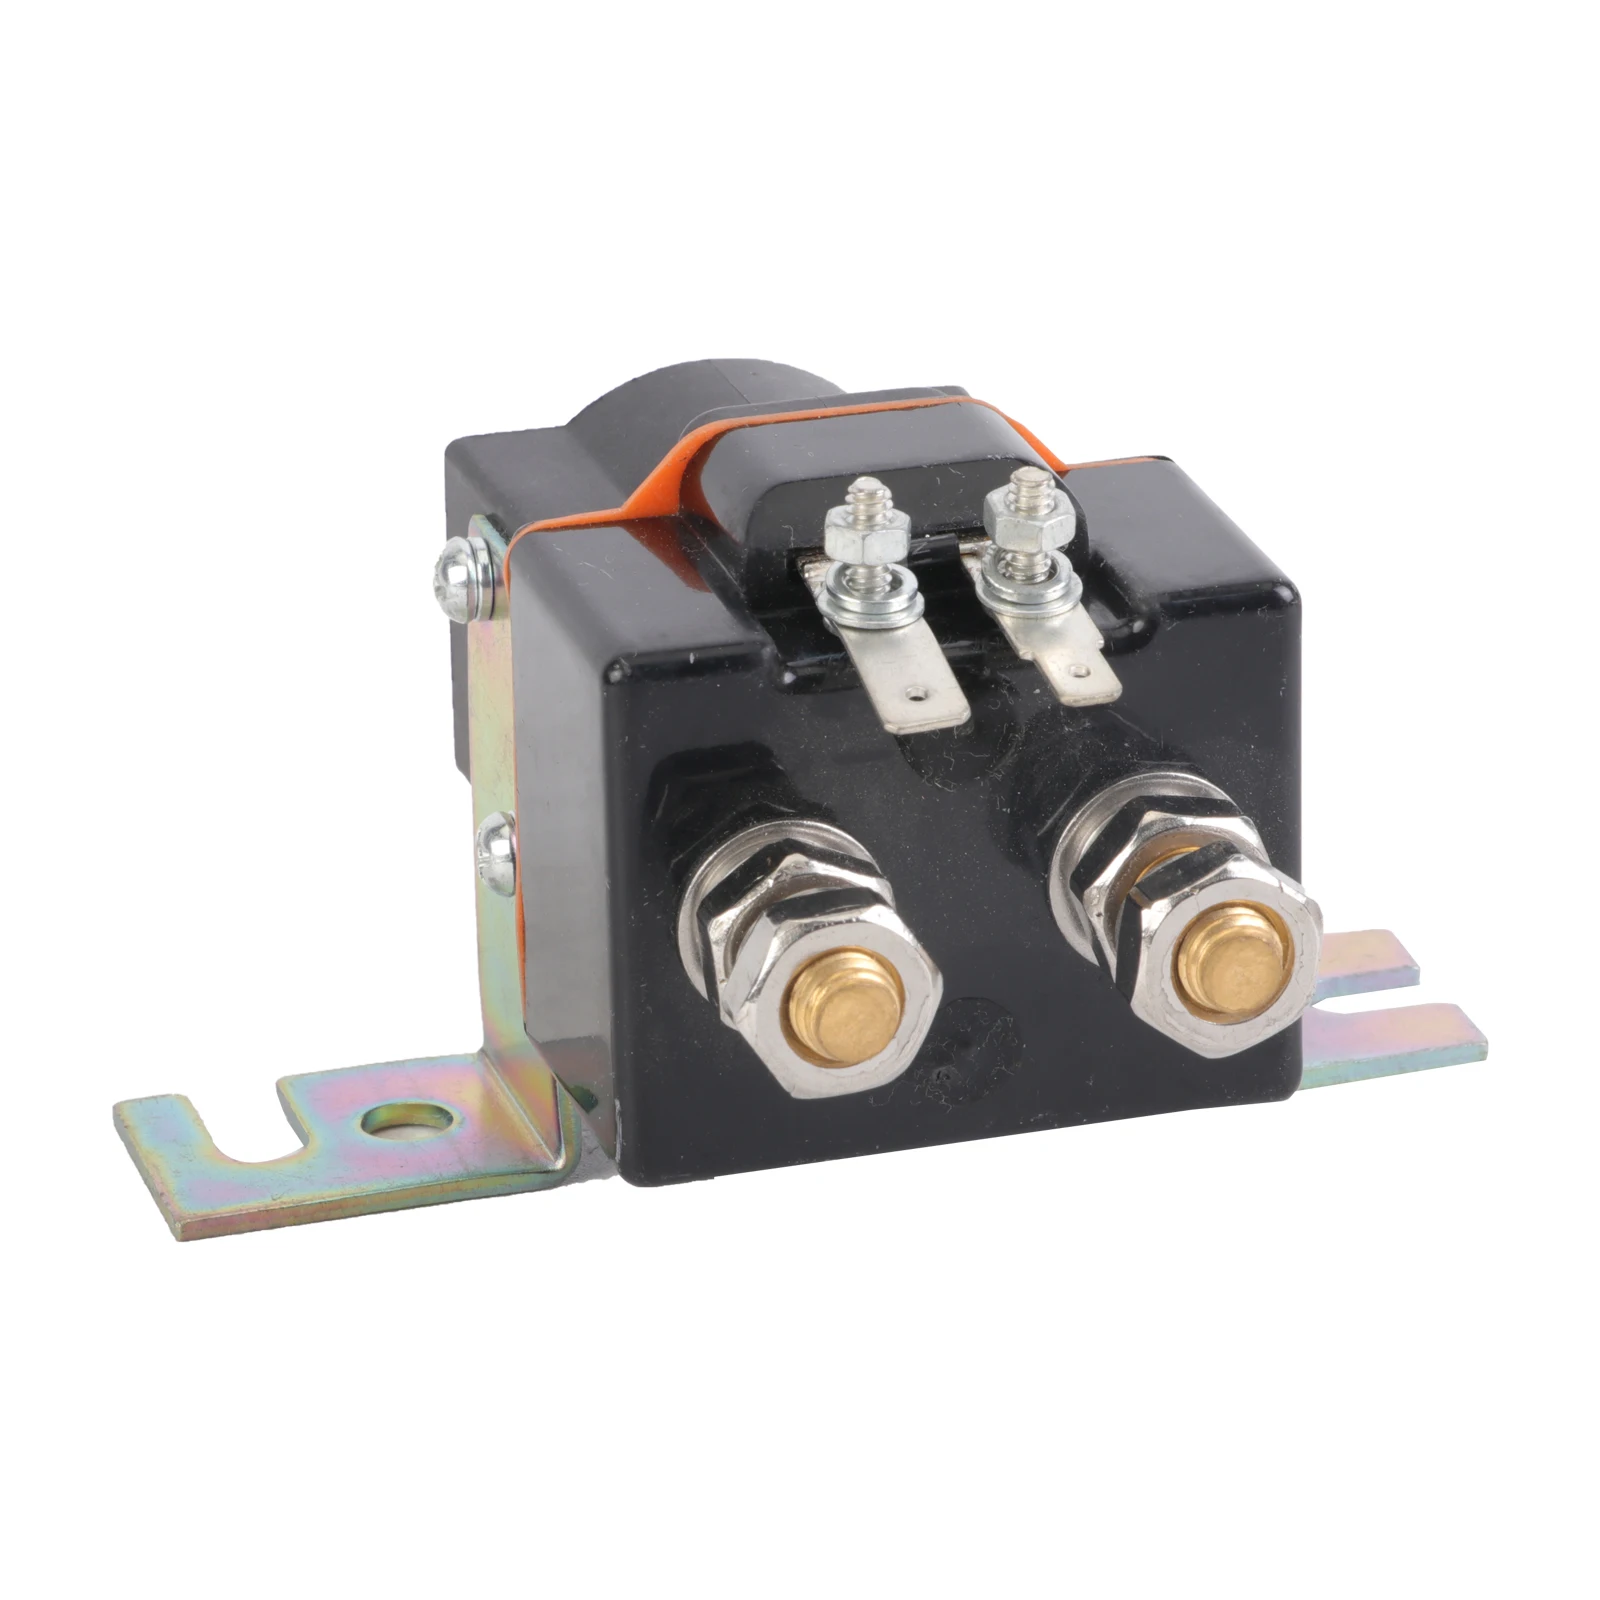 High quality low price 48v 250a club car normal size relay universal club car relay base connector